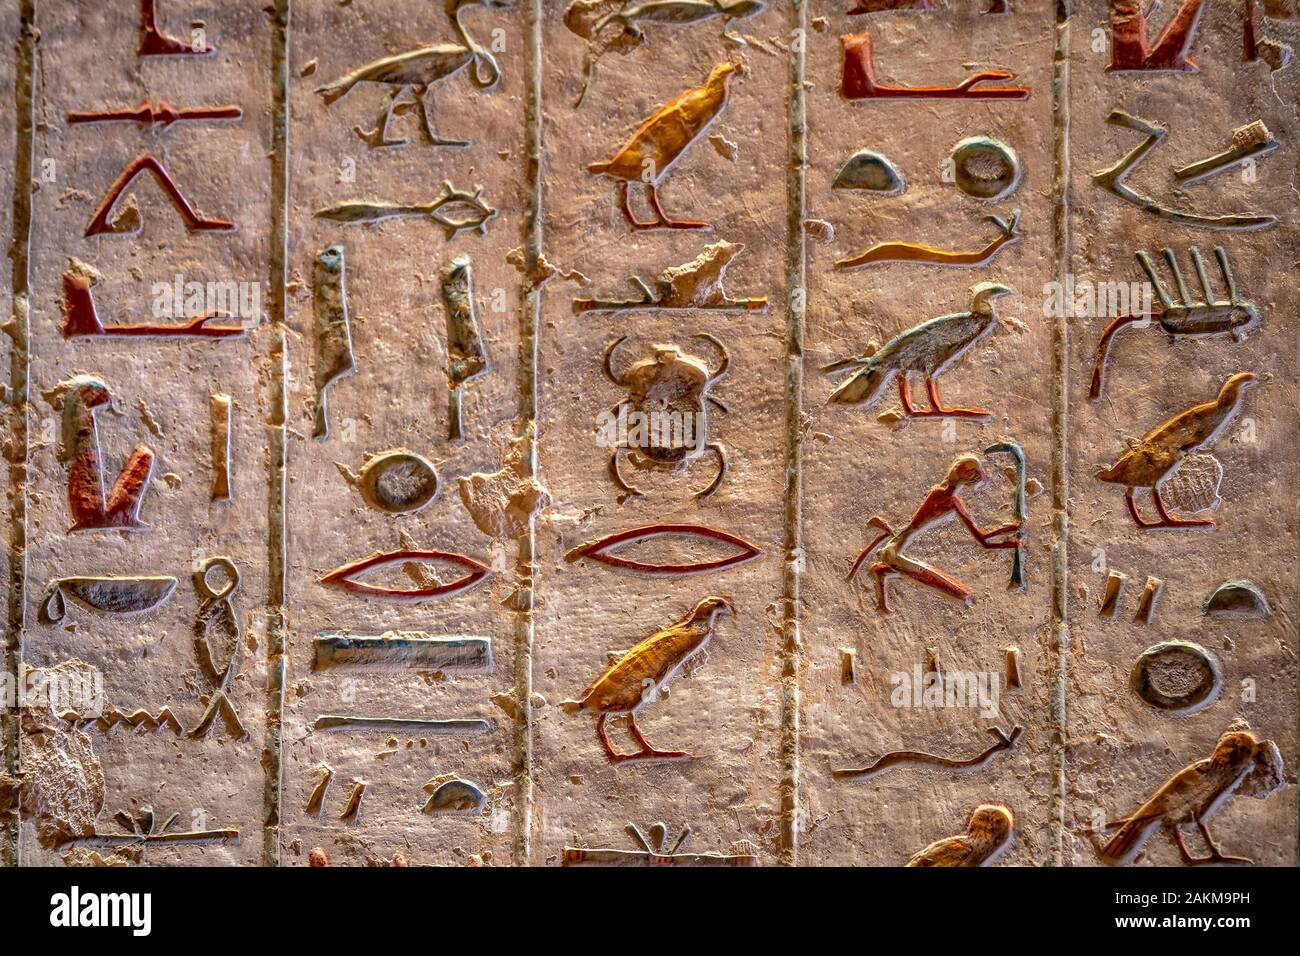 Hieroglyphs on walls in tombs in the Valley of Kings in Luxor, Egypt Stock Photo